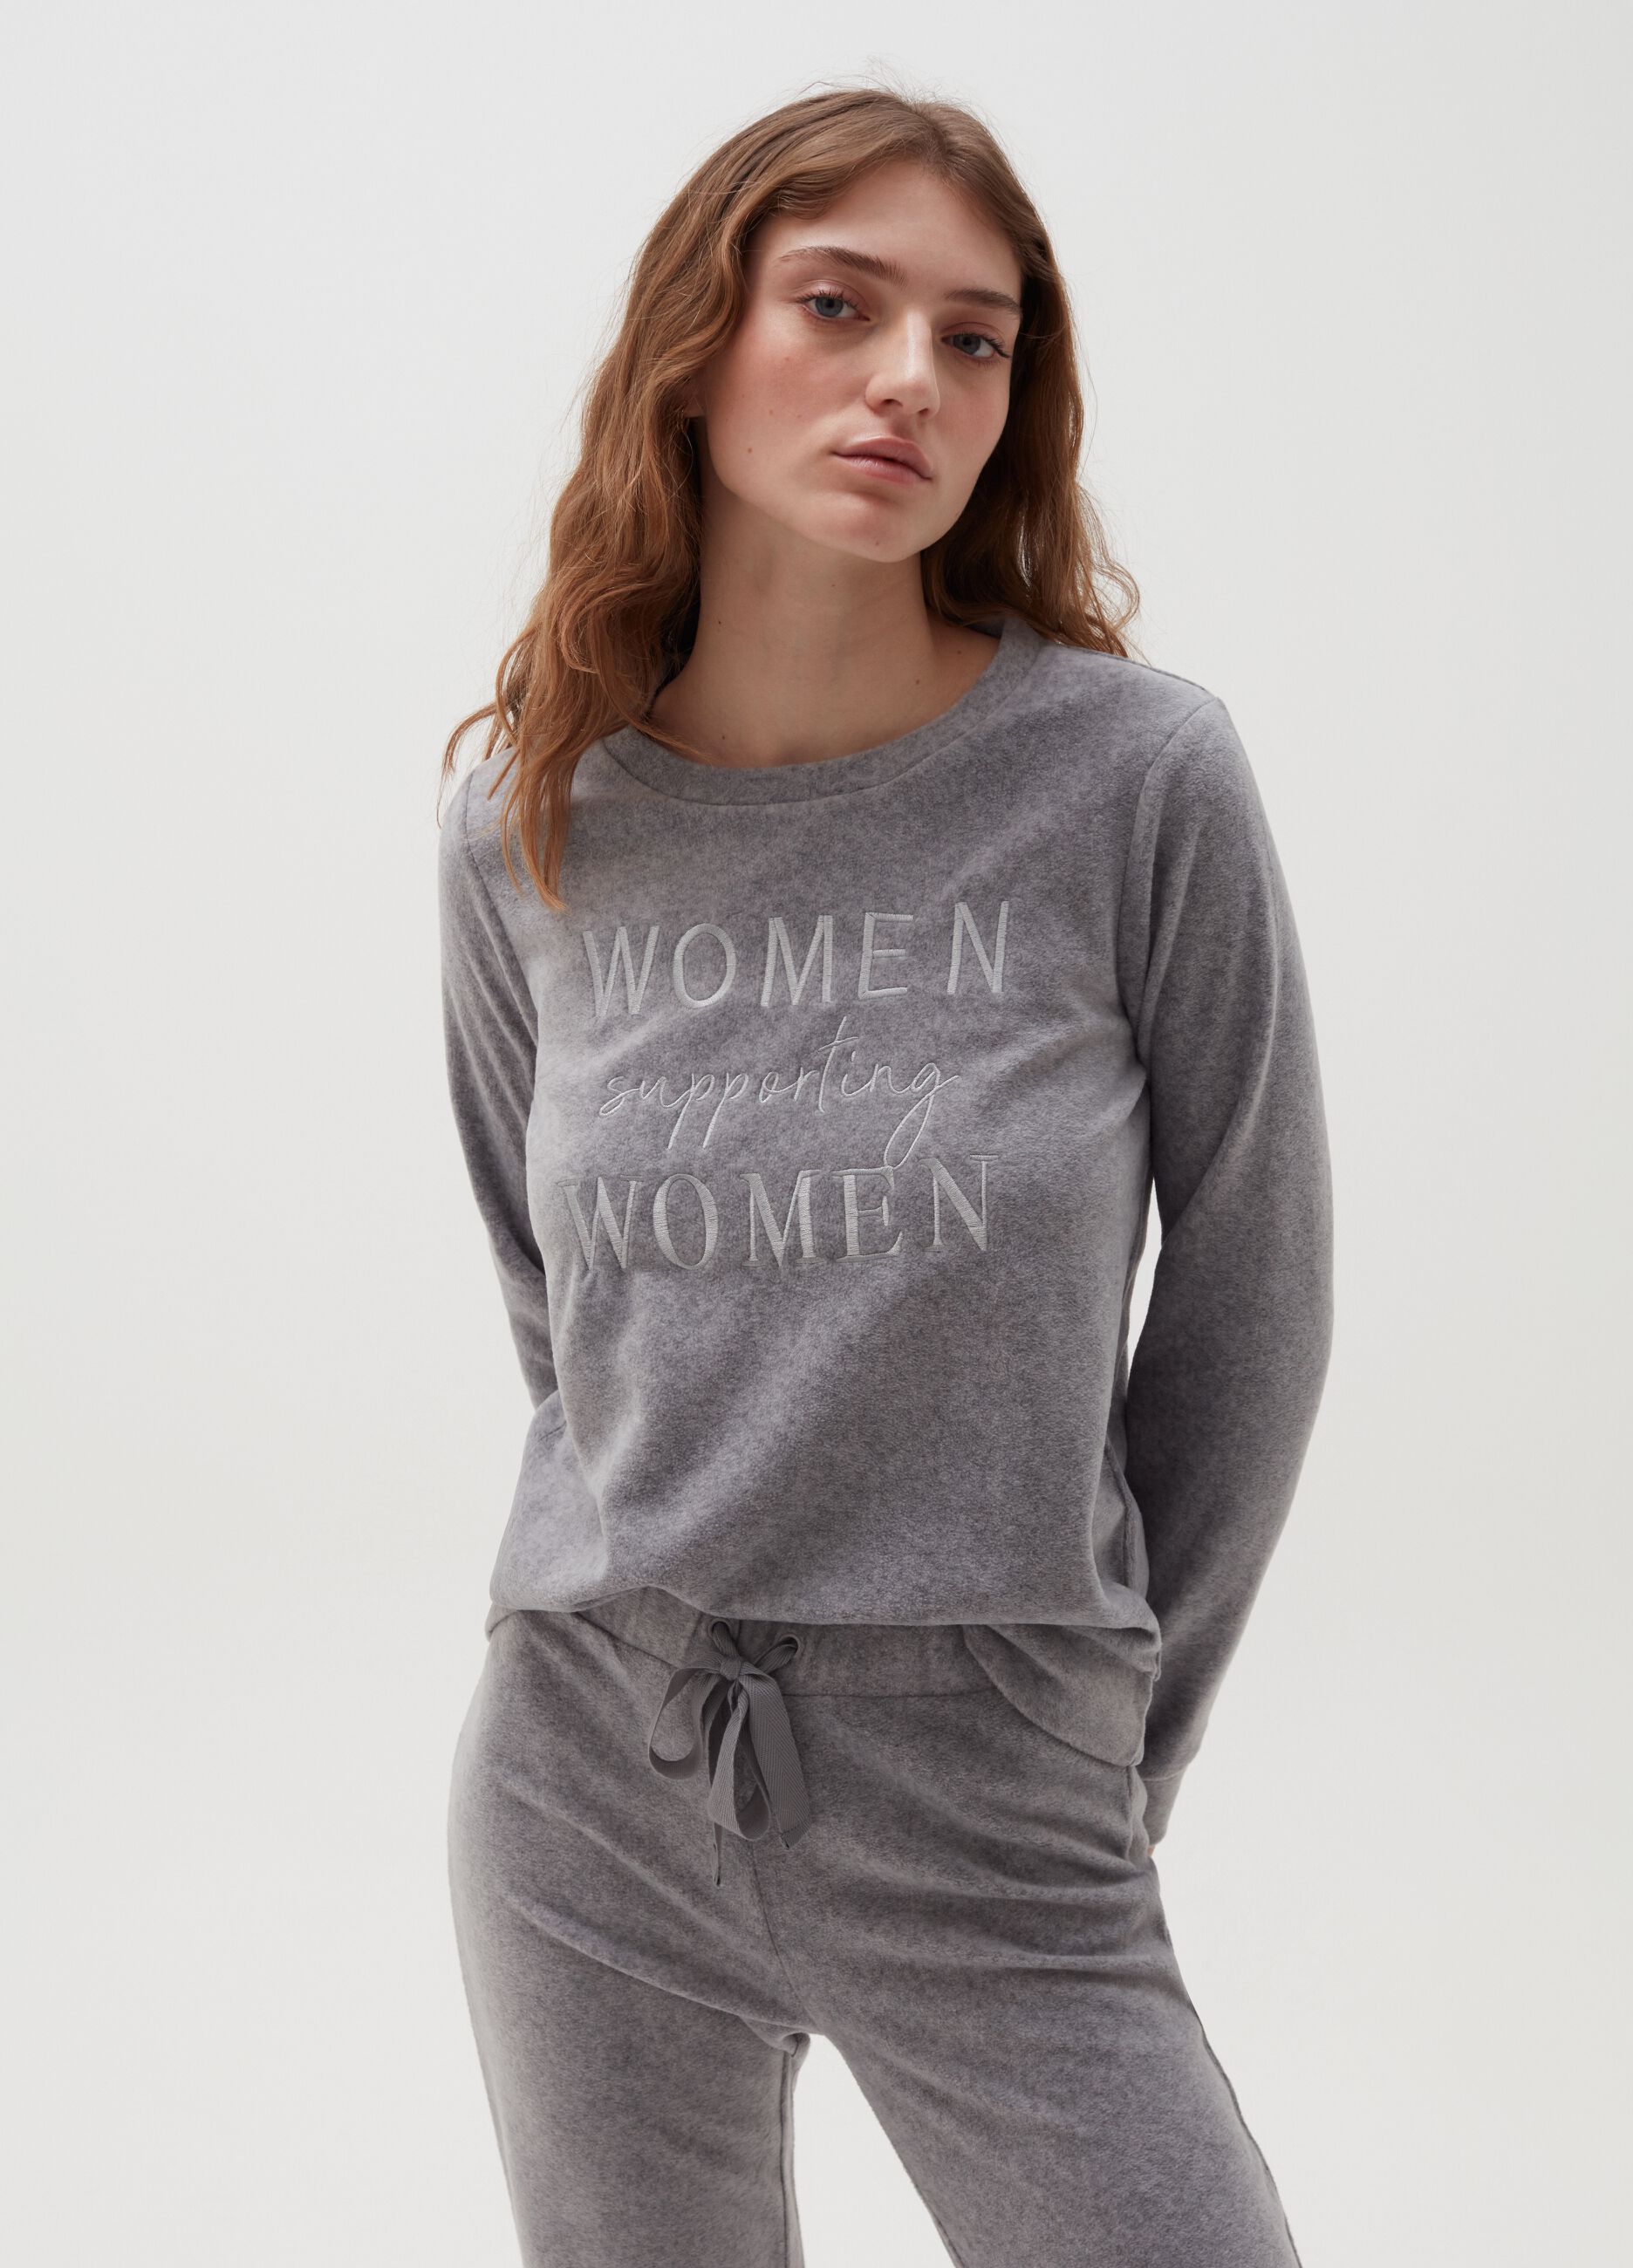 Mélange pyjama top with embroidered lettering